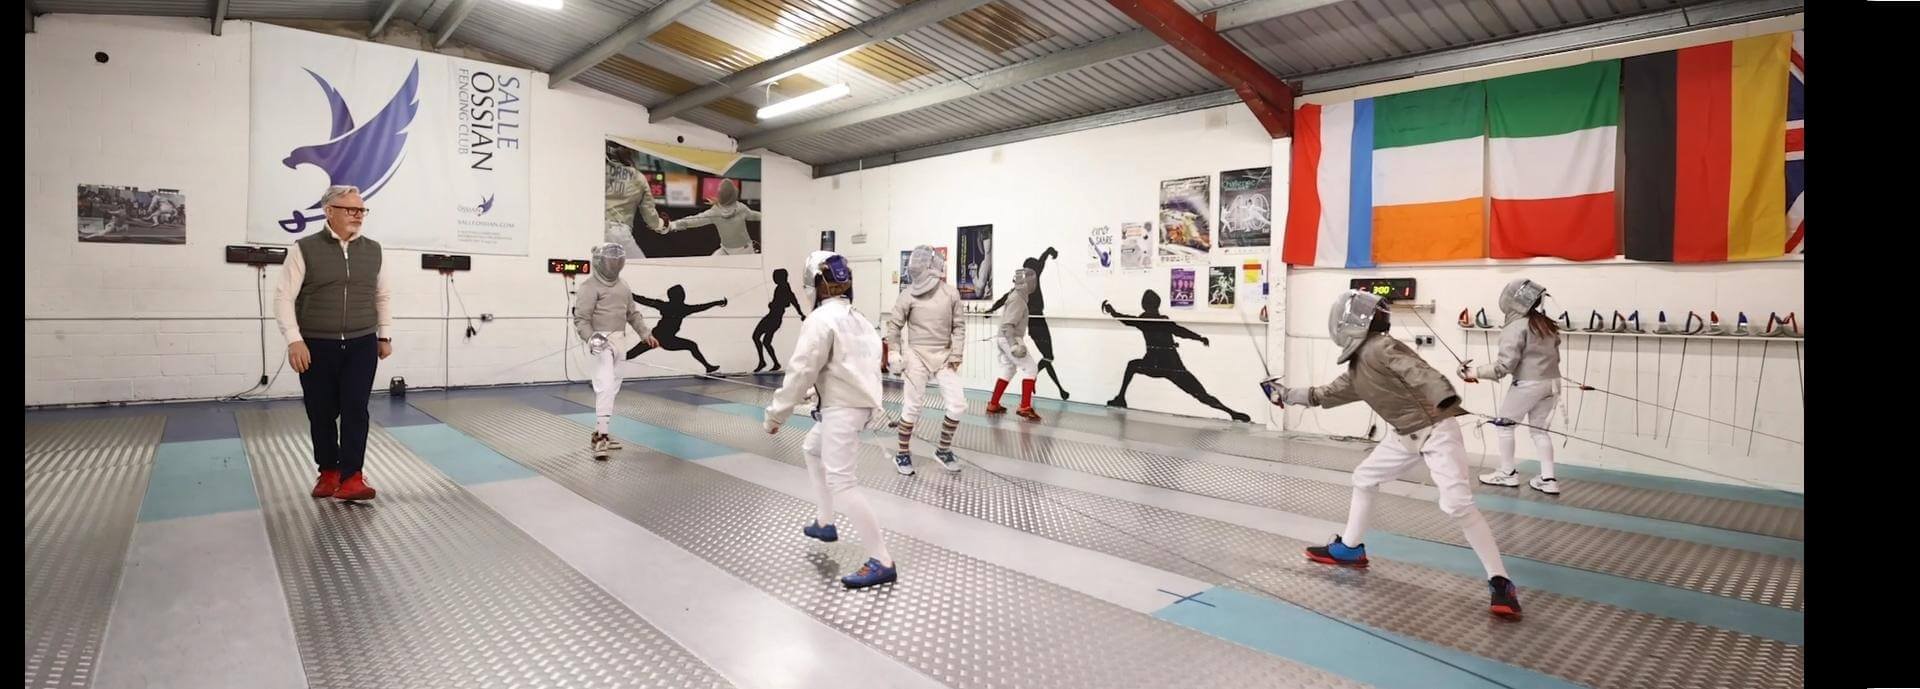 Philip Carson coaches fencing students at his fencing club